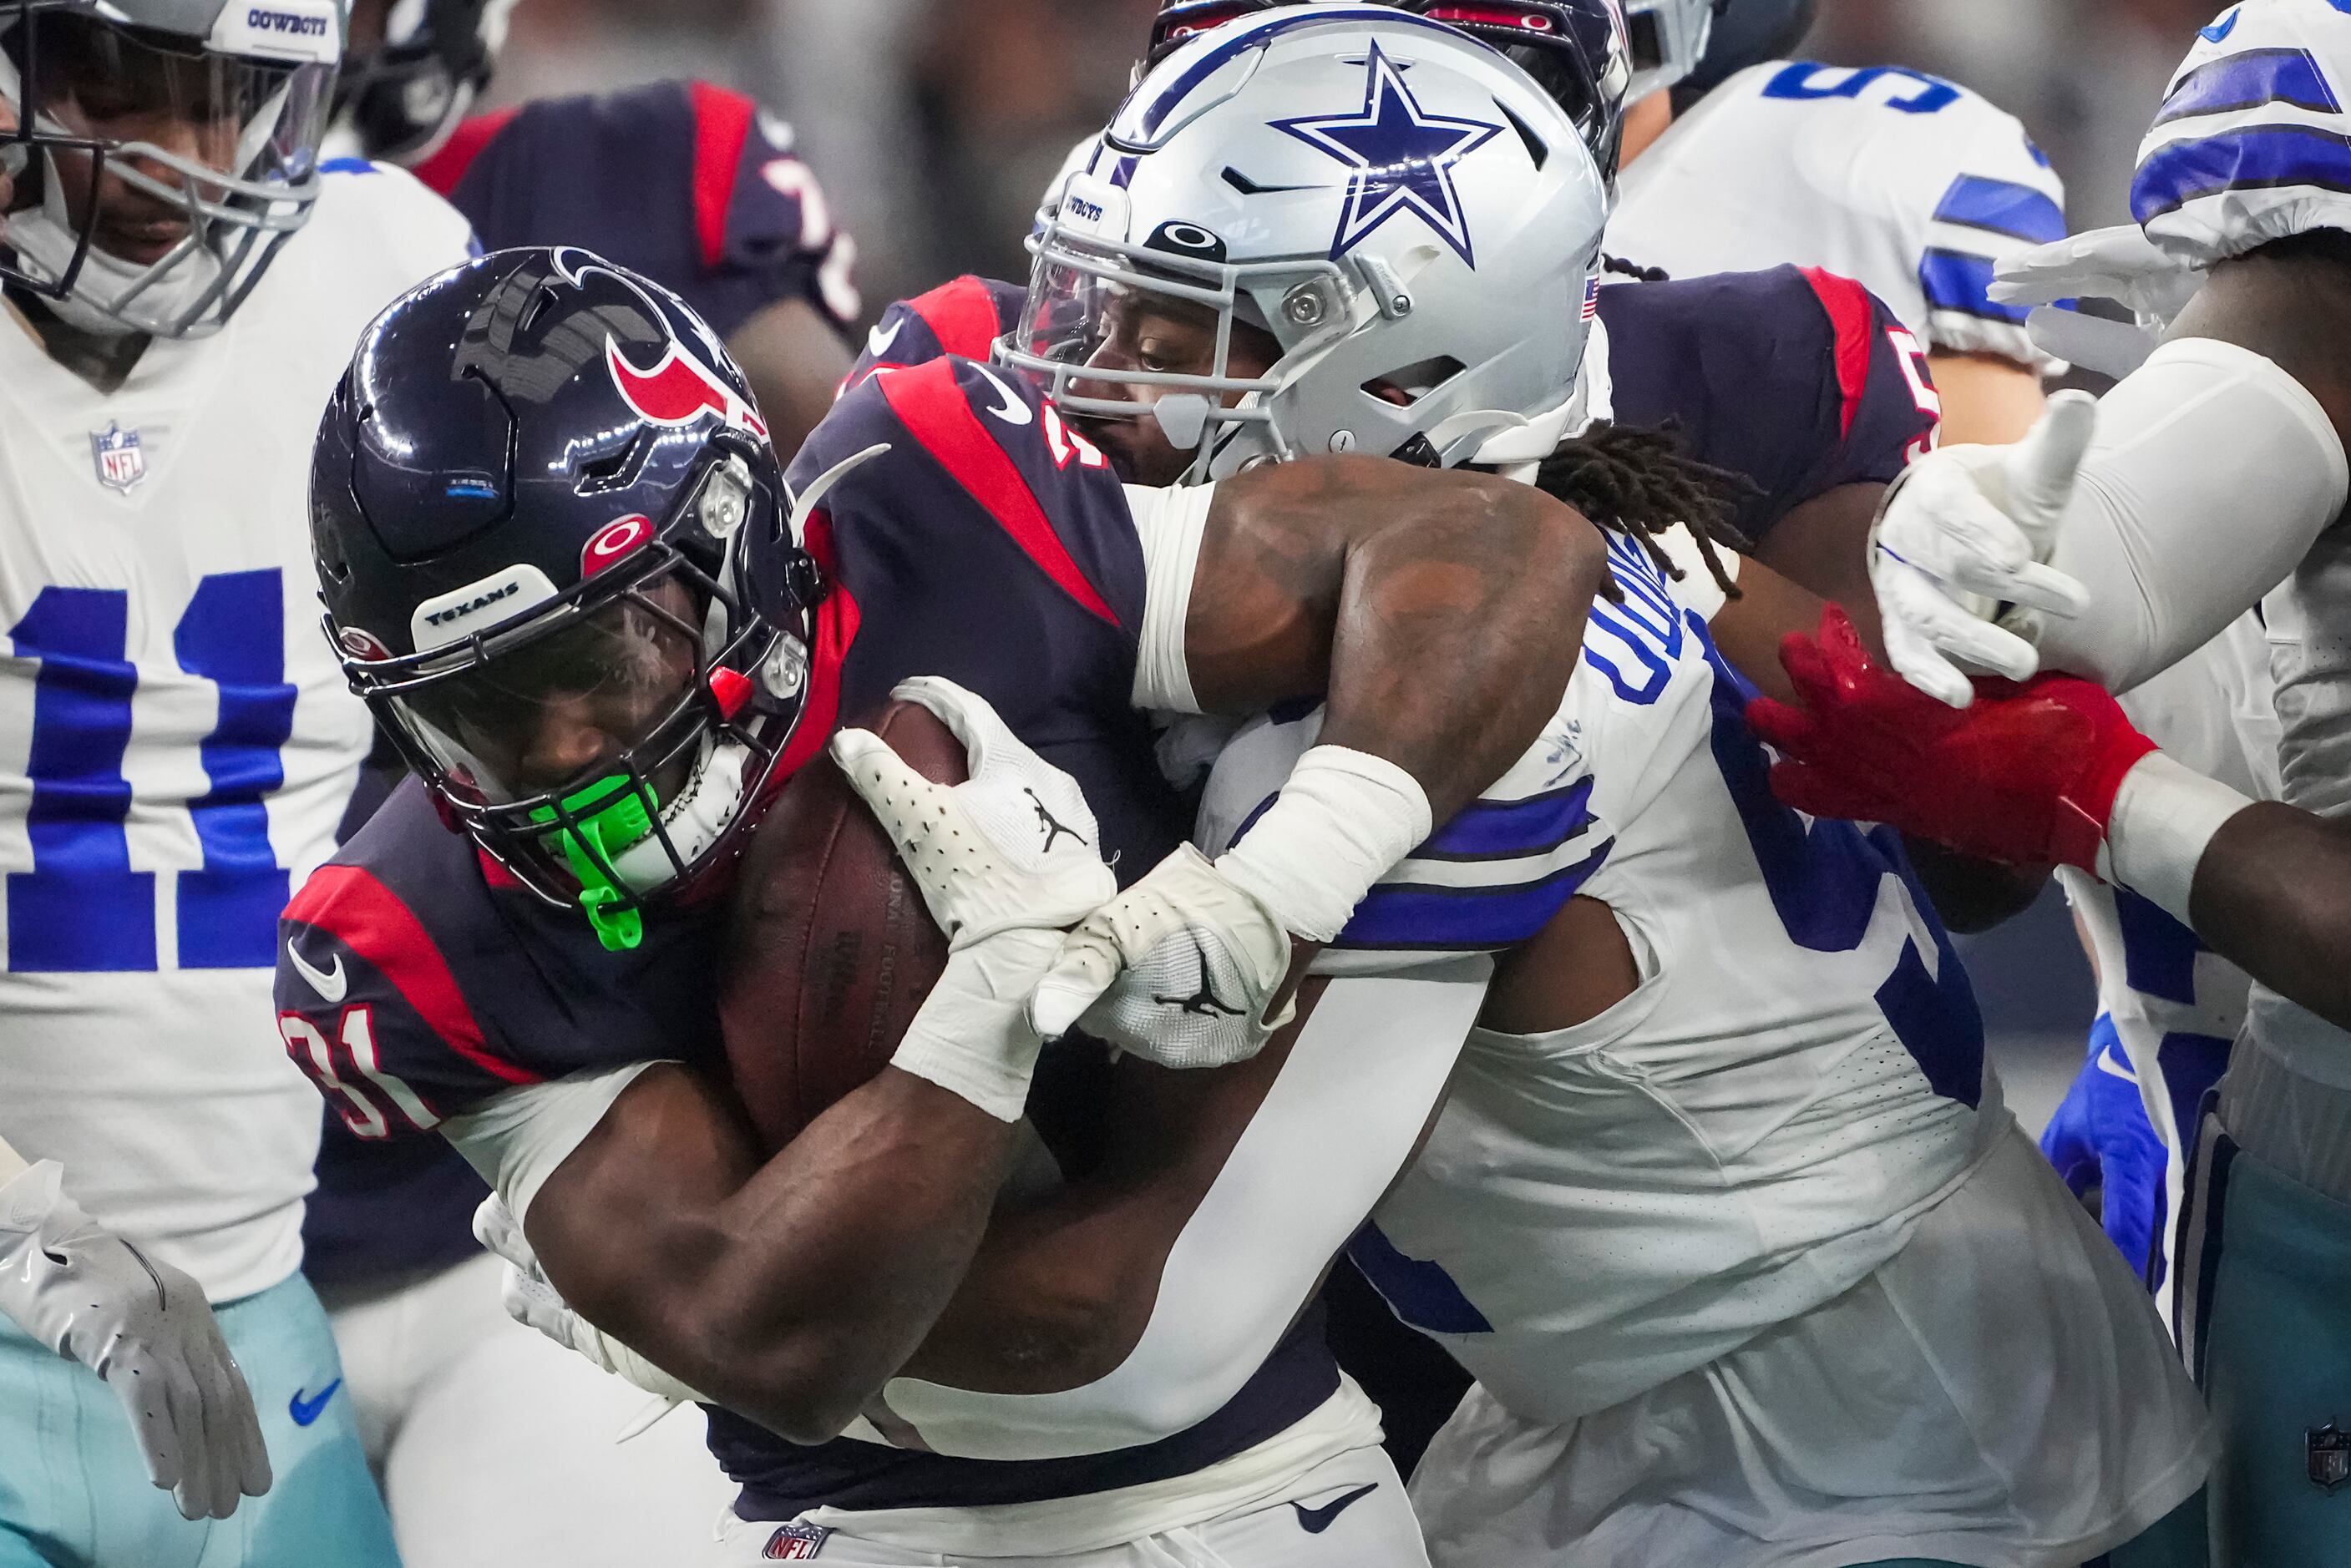 Photos: Cowboys avoid being upset at home, come back to win over